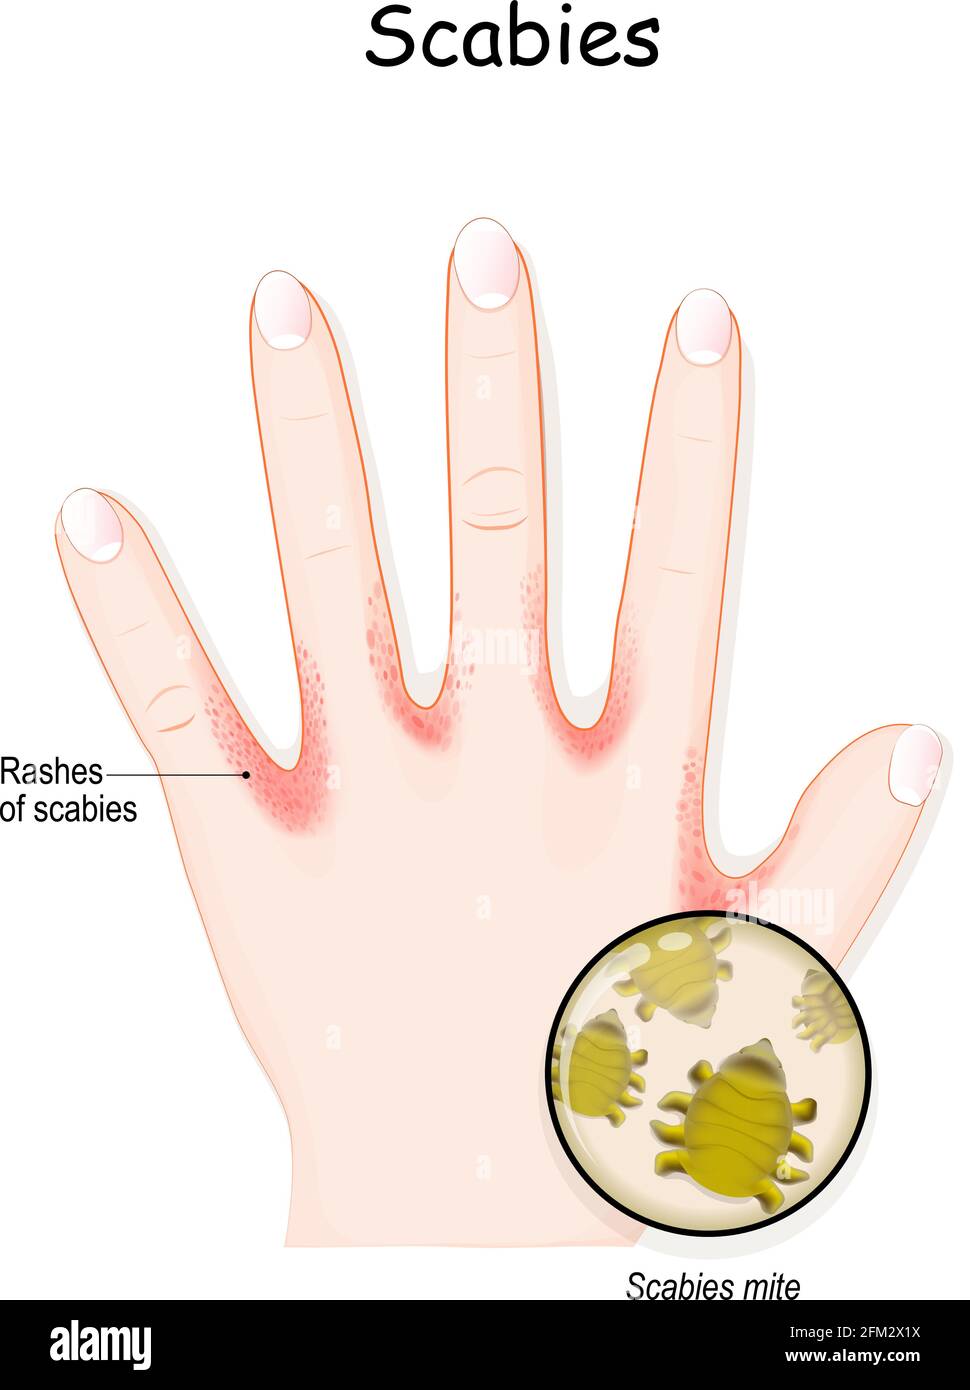 Scabies mite. Human's hand. skin with Rashes. seven-year itch is a contagious skin infestation by the mite Sarcoptes scabiei. Close-up of Scabies mite Stock Vector